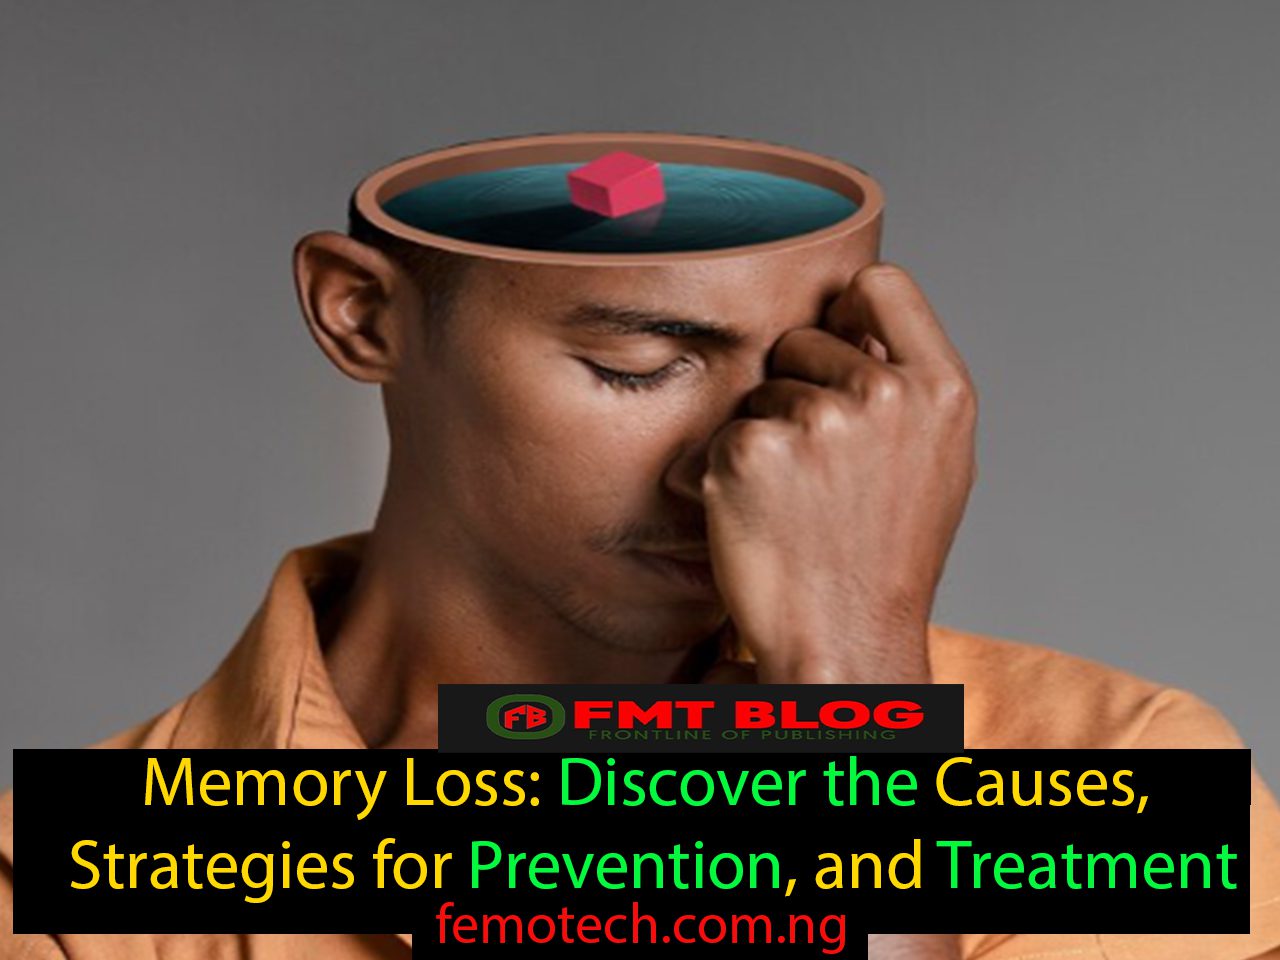 Memory Loss: Discover the Causes, Strategies for Prevention, and Treatment